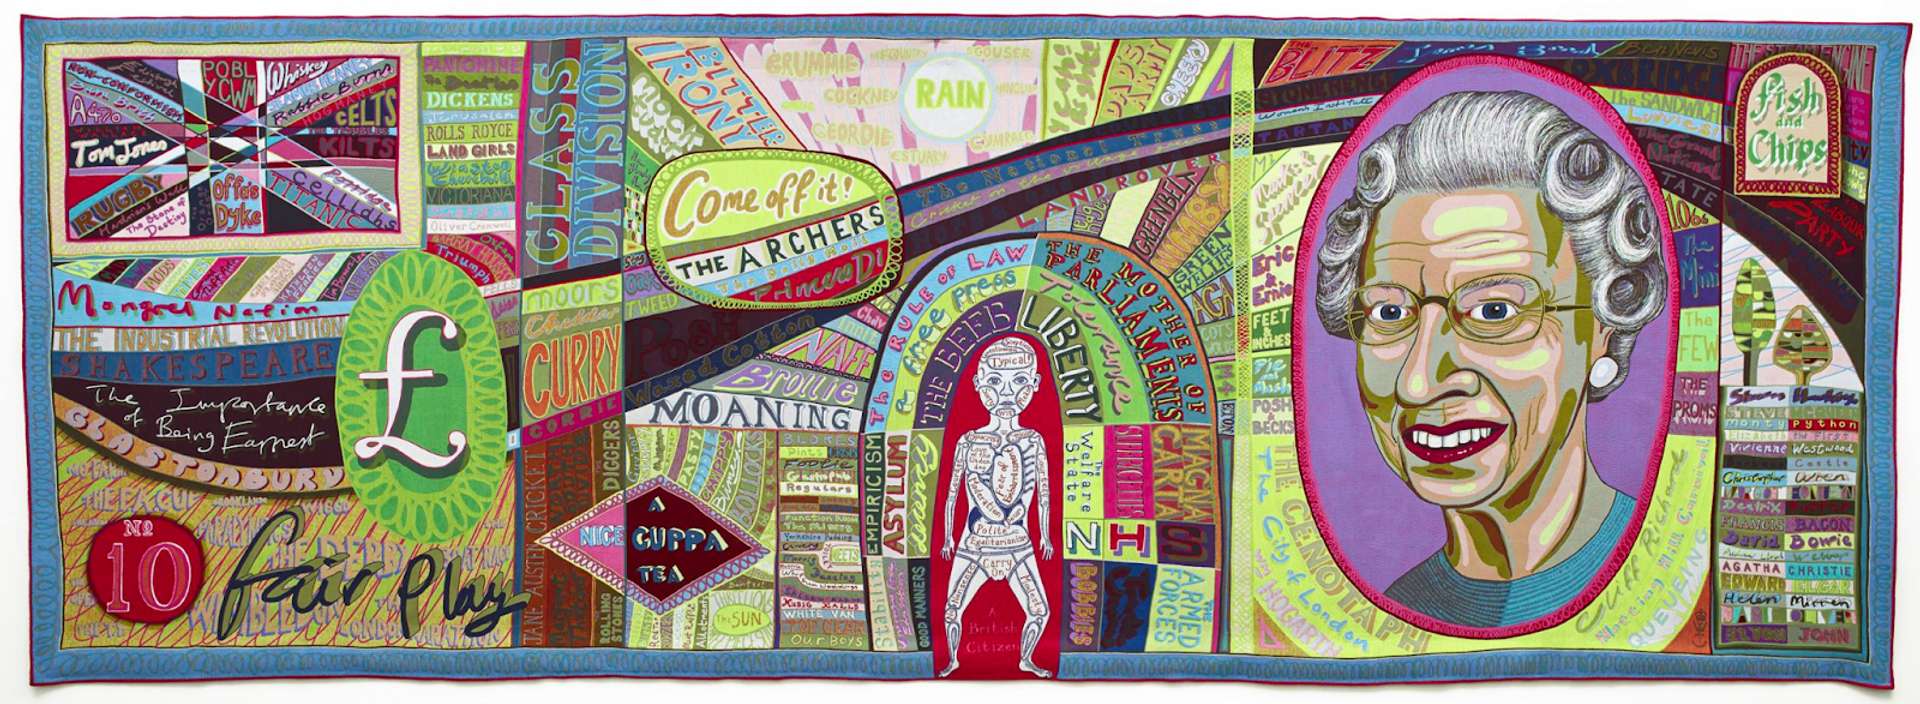 A vibrant tapestry featuring visual icons of British culture, including Queen Elizabeth II, a pound sign, and phrases popular in British English.